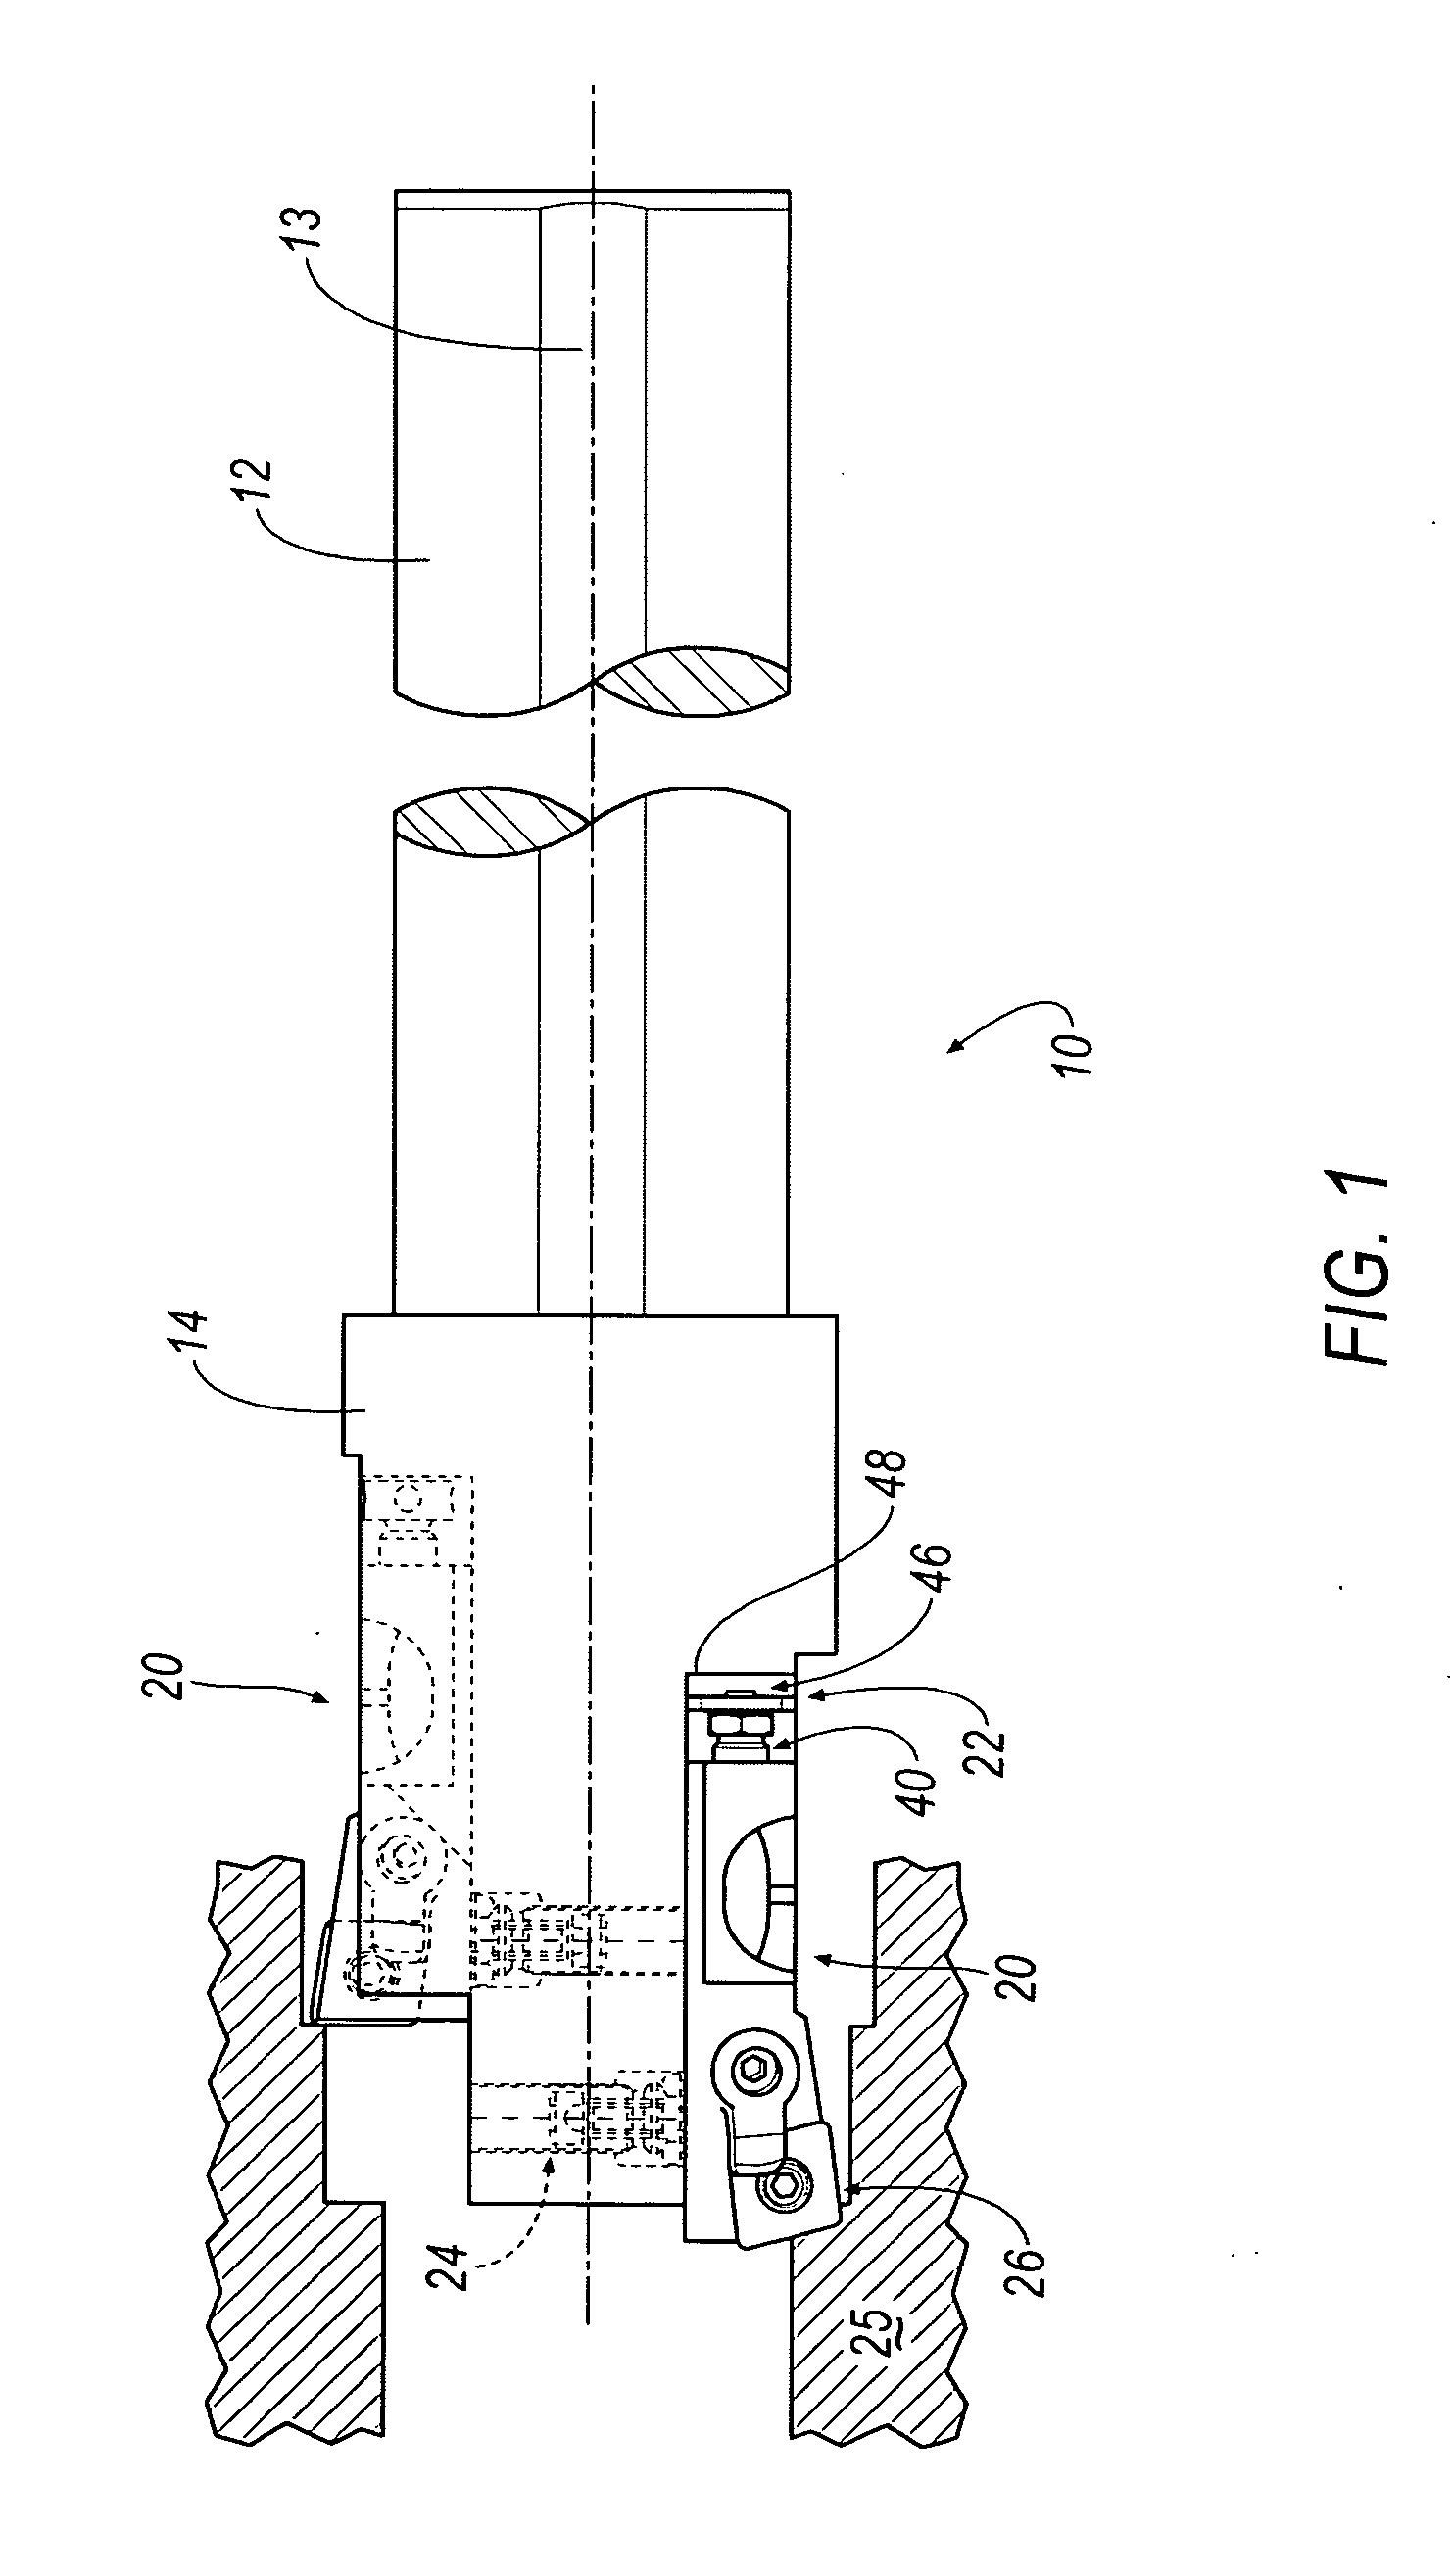 Micro-adjustable differential screw assembly